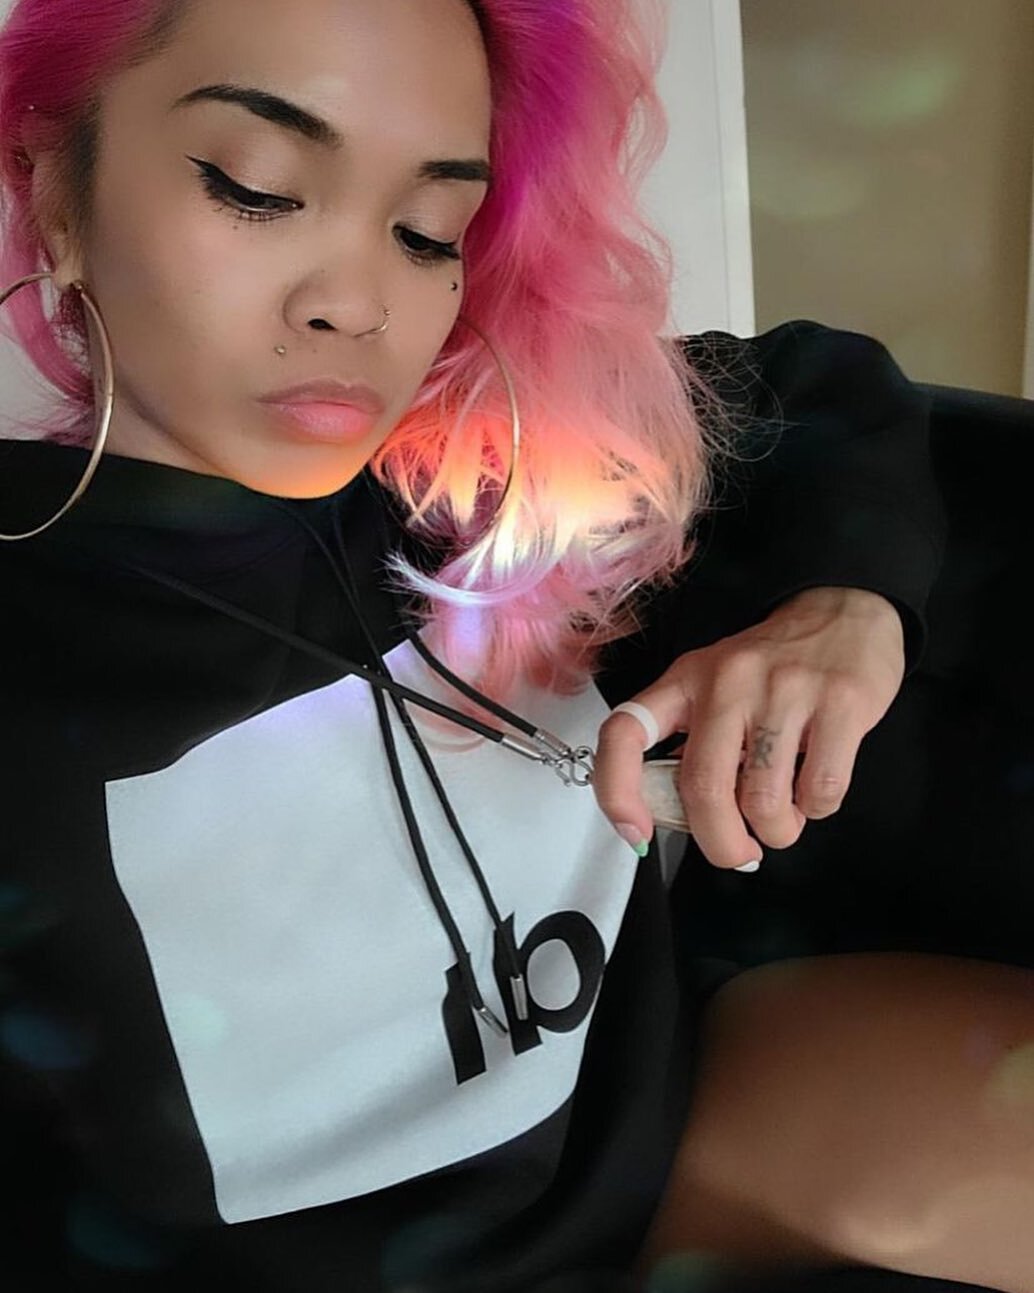 Life is so much more peaceful, when you surround yourself with good people. 

@missesg.fit.six 
_____________________________________
#goodpeople #positivity #encouragement #strength #energy #vibes #focusonthepresent #pinkhair #cheatcode #hoodie #whi